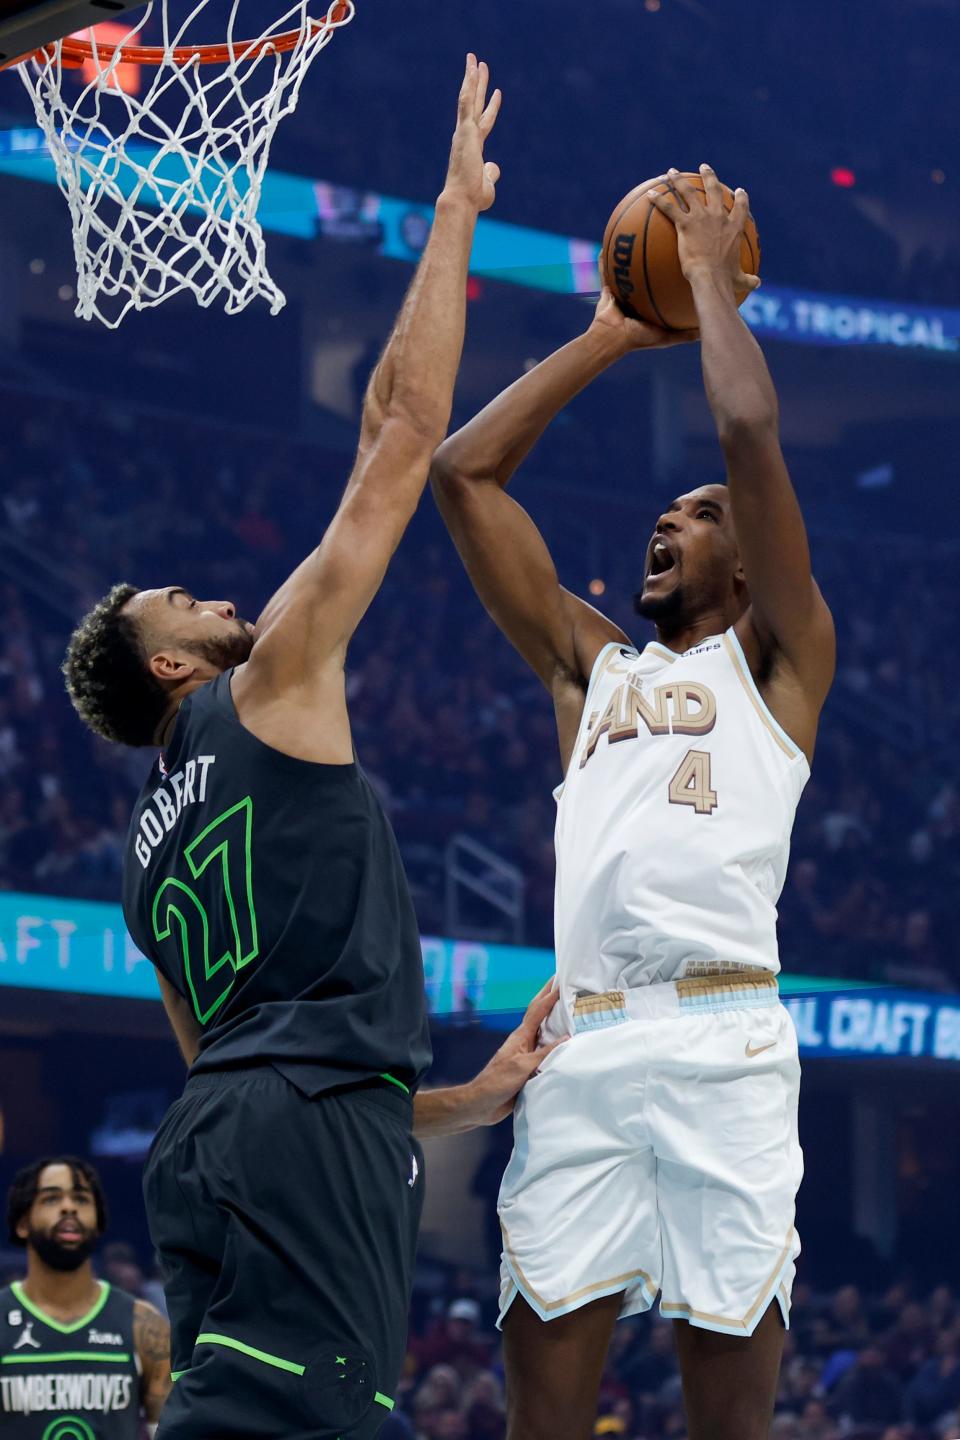 Cleveland Cavaliers forward Evan Mobley (4) shoots against Minnesota Timberwolves center Rudy Gobert (27) during the first half of an NBA basketball game, Sunday, Nov. 13, 2022, in Cleveland. (AP Photo/Ron Schwane)